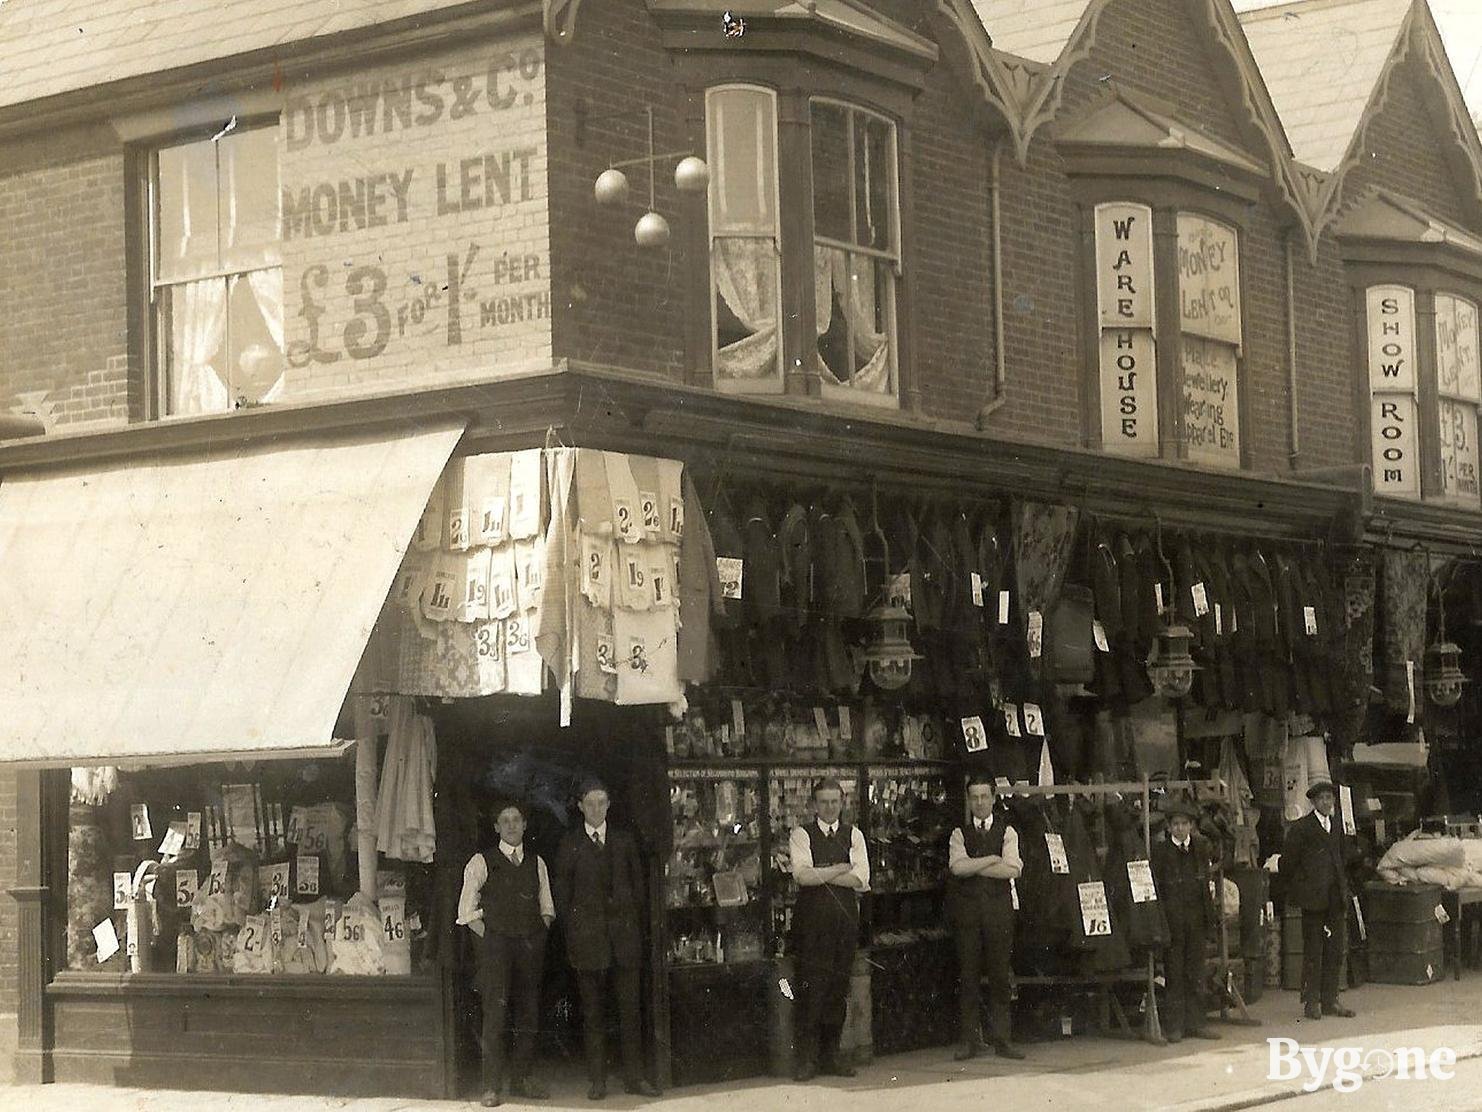 Downs and Co Pawn shop, 157-161 Kingston Road